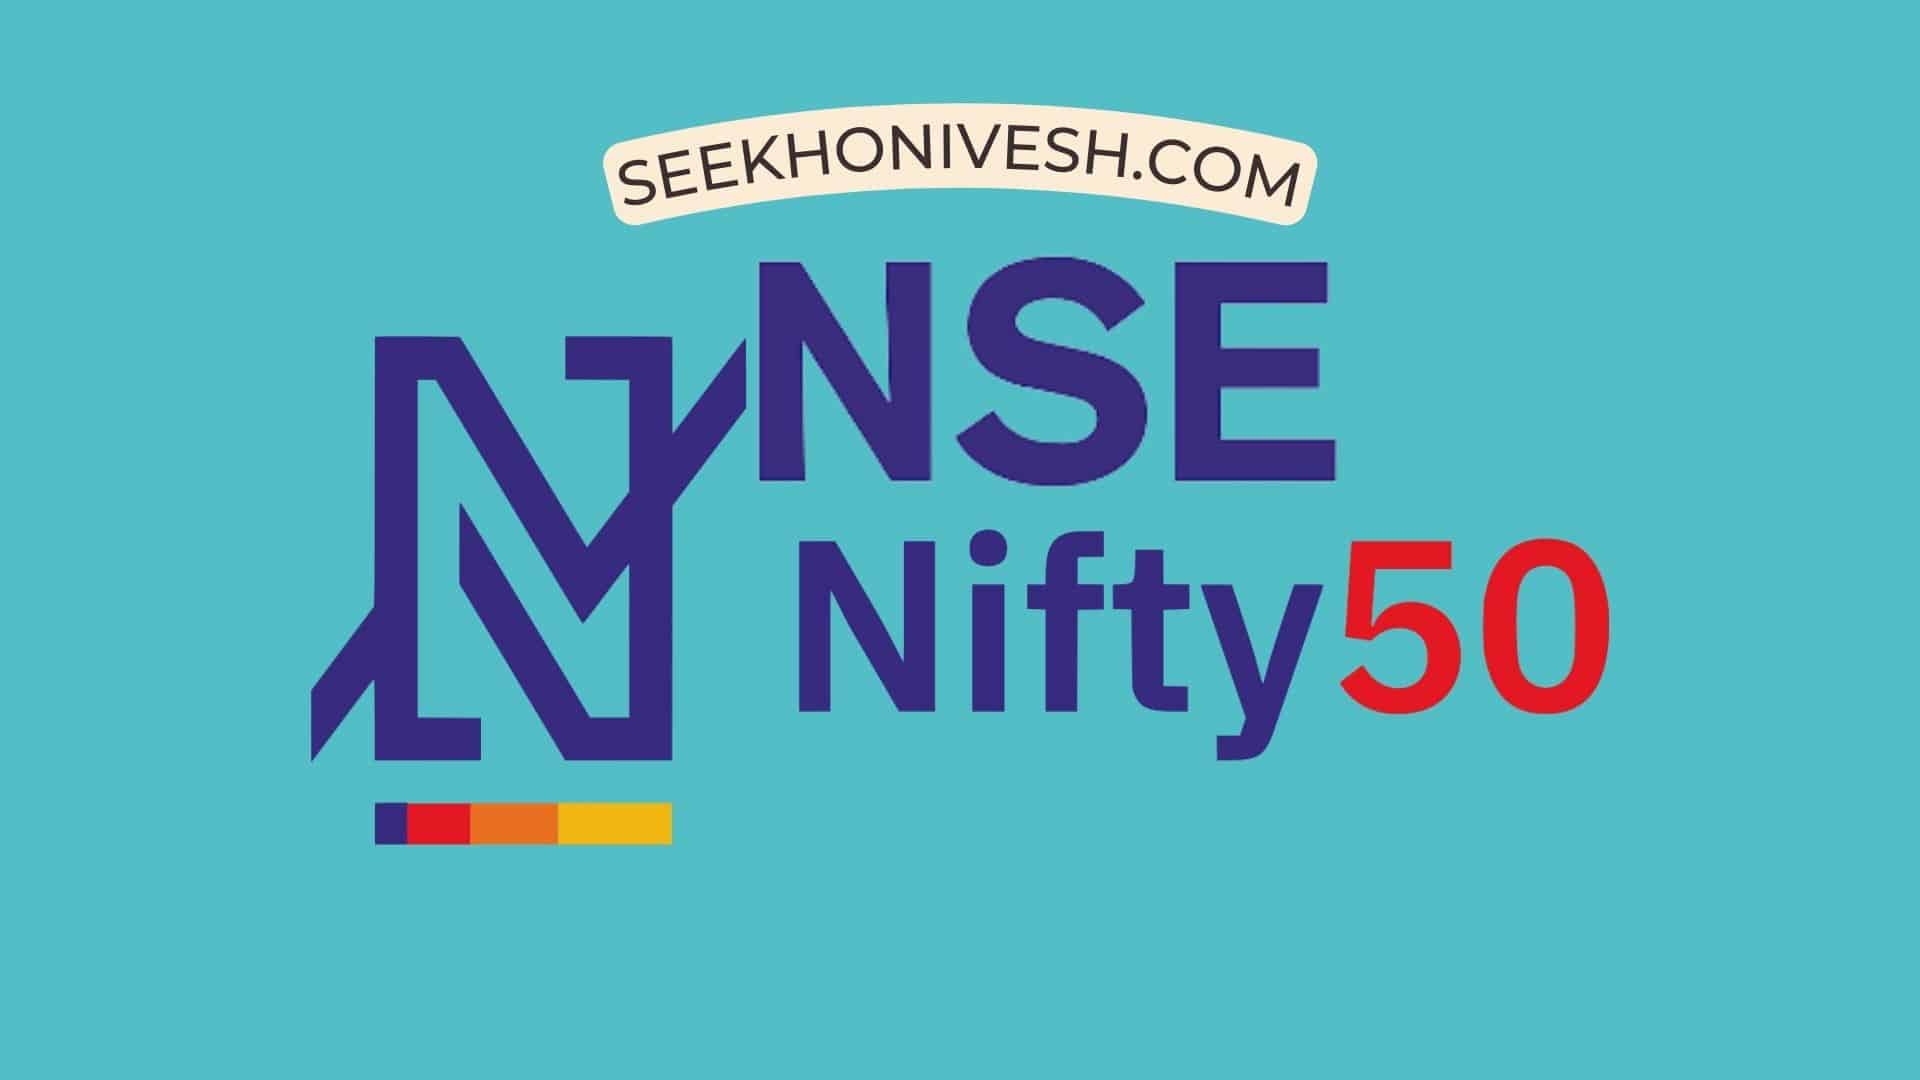 NSE Nifty 50 companies including Midcap and smallcap 50 companies